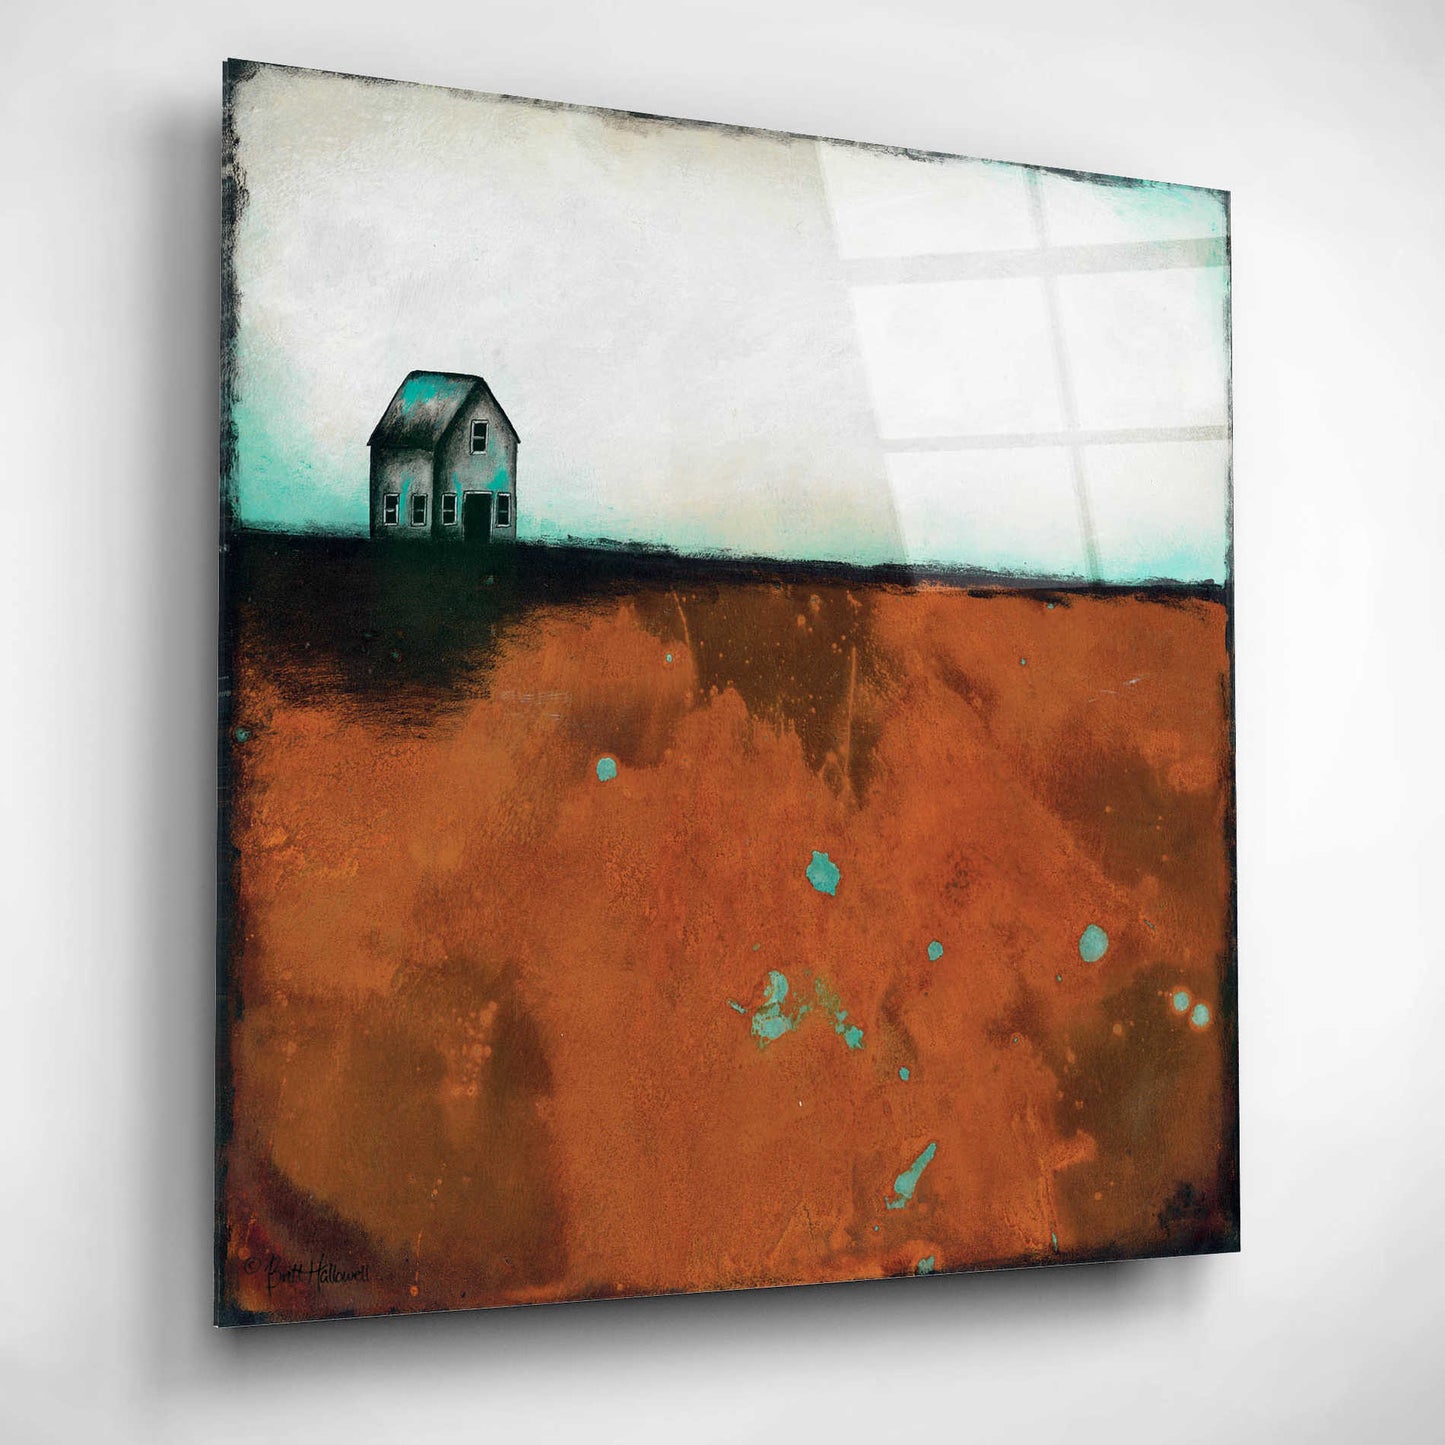 Epic Art 'Country Solace' by Britt Hallowell, Acrylic Glass Wall Art,12x12